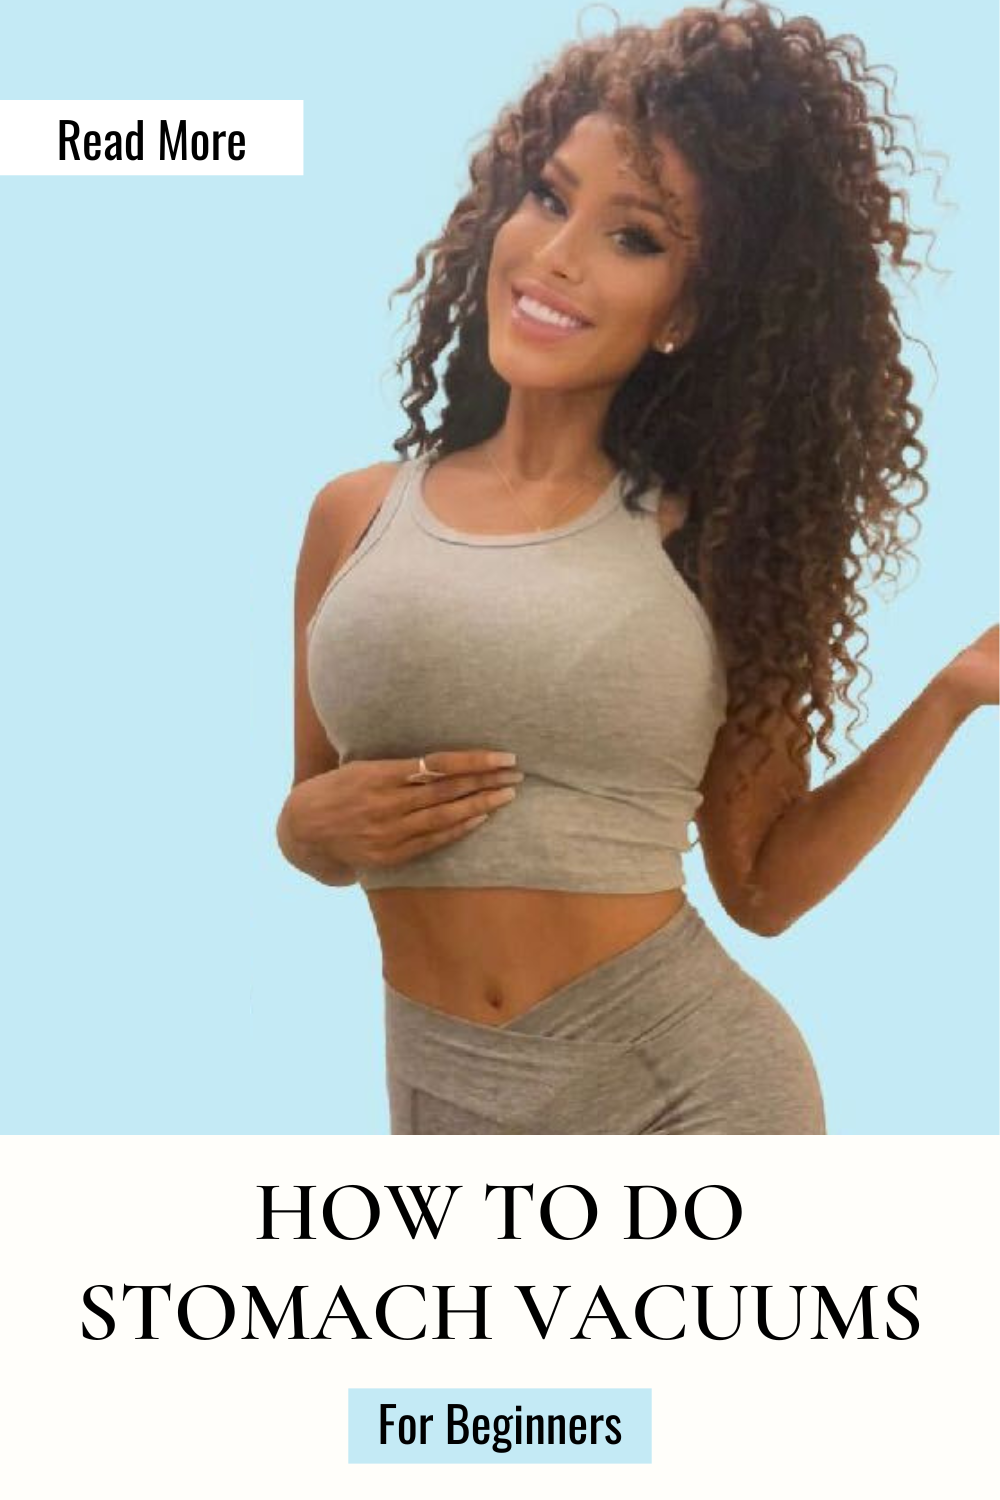 How to Do Stomach Vacuums for Beginners